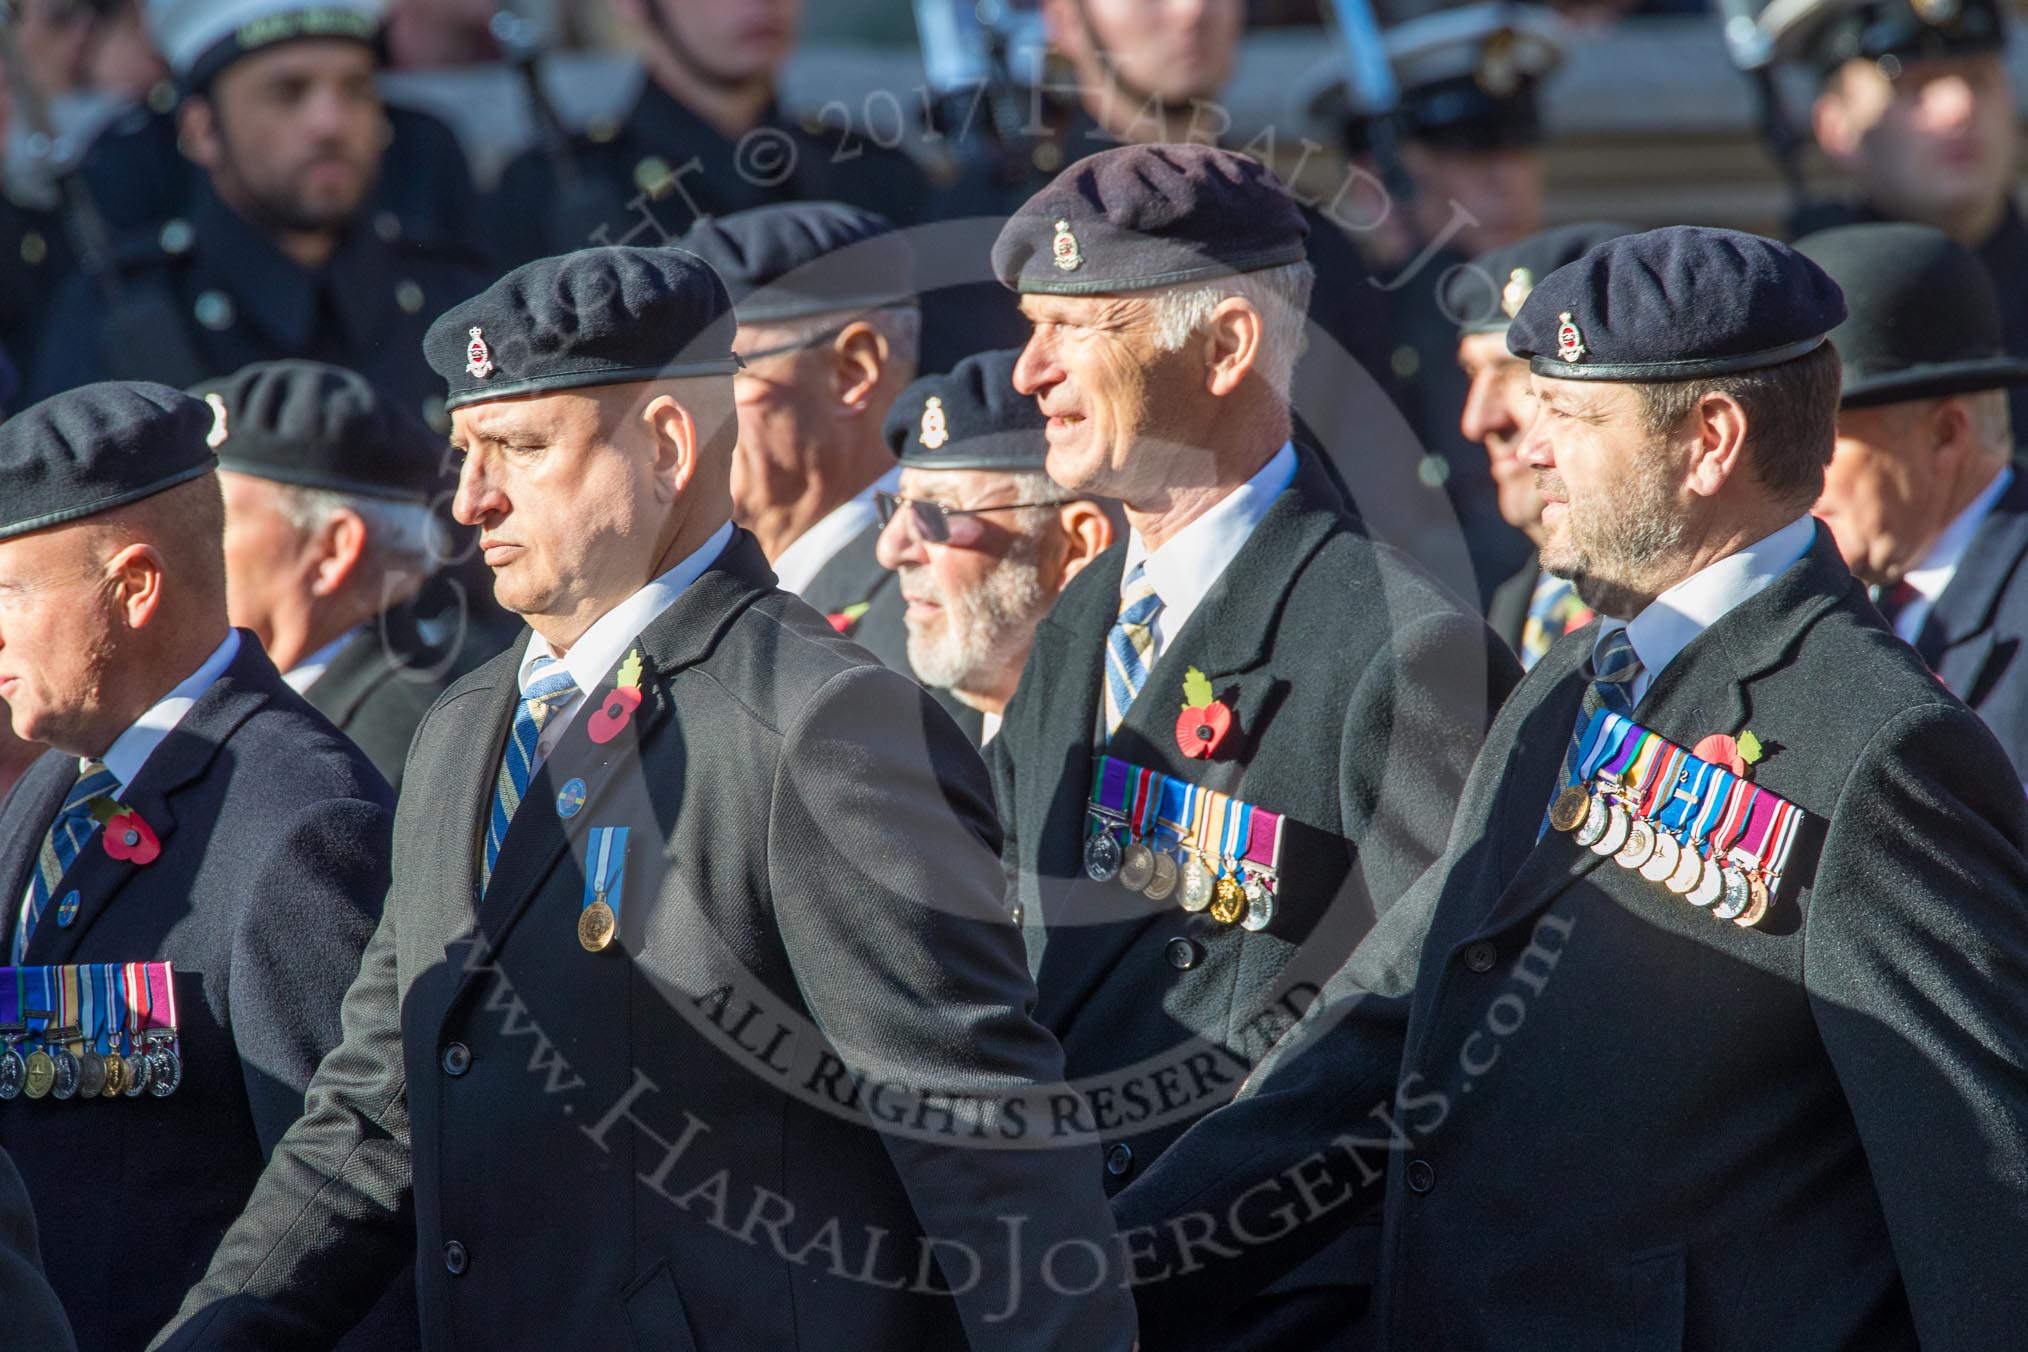 3rd Regiment Royal Horse Artillery Past and Present(Group B33, 70 members) during the Royal British Legion March Past on Remembrance Sunday at the Cenotaph, Whitehall, Westminster, London, 11 November 2018, 12:12.